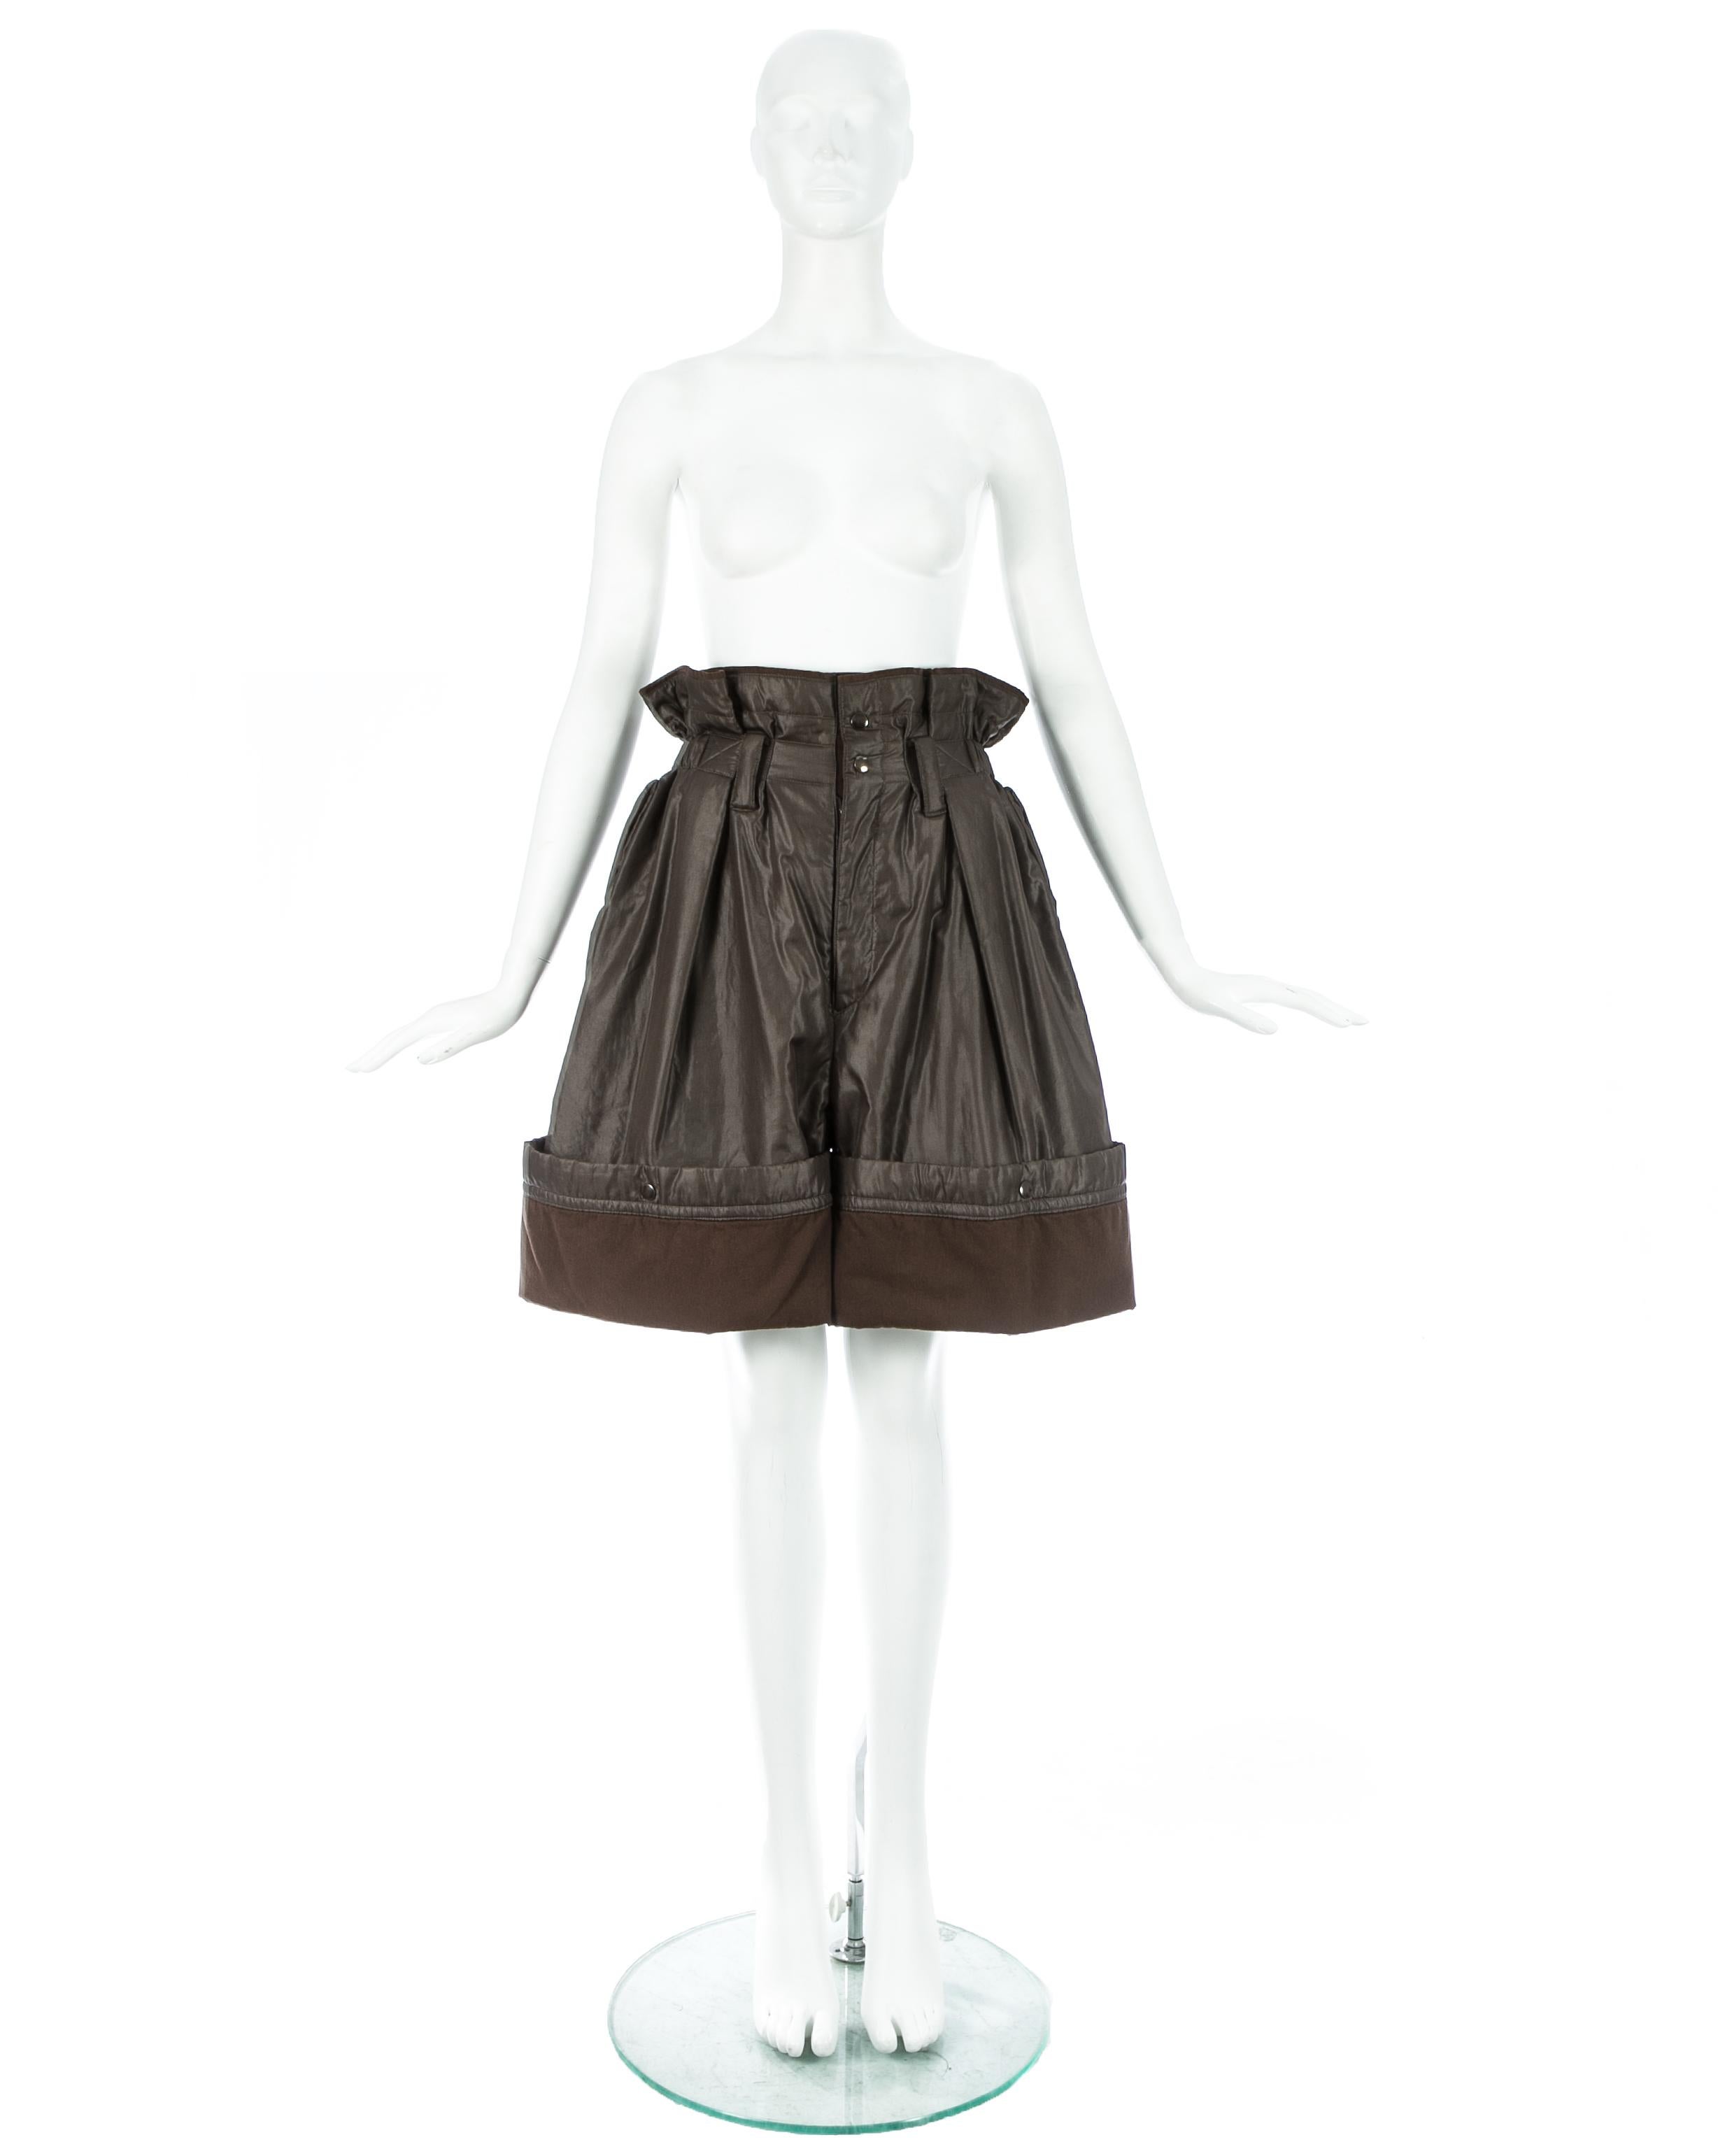 Issey Miyake; olive nylon oversized parachute shorts with paper bag elastic waistband, 2 front pockets and snap button fastenings around hem, allowing the shorts to be turned up or let down.

Fall-Winter 1983